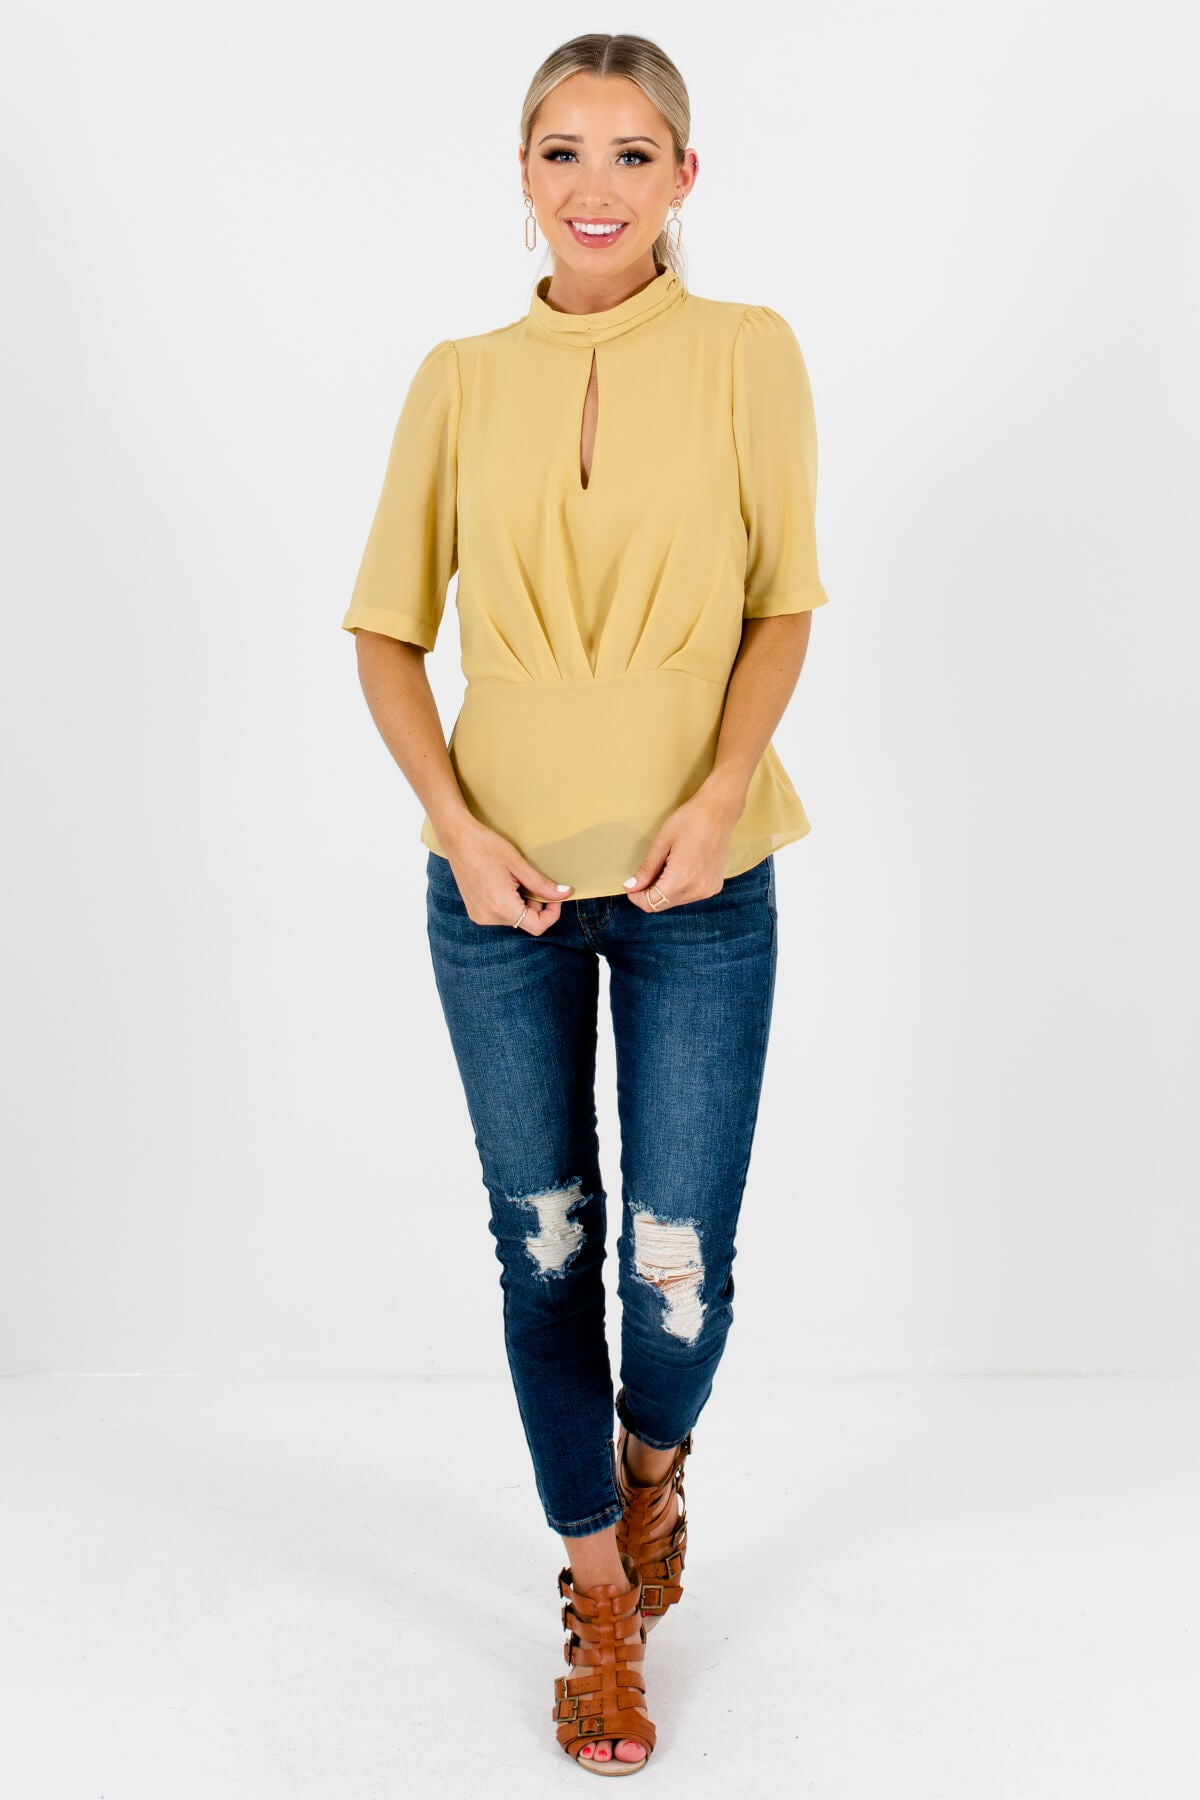 Women's Yellow Spring and Summertime Boutique Clothing